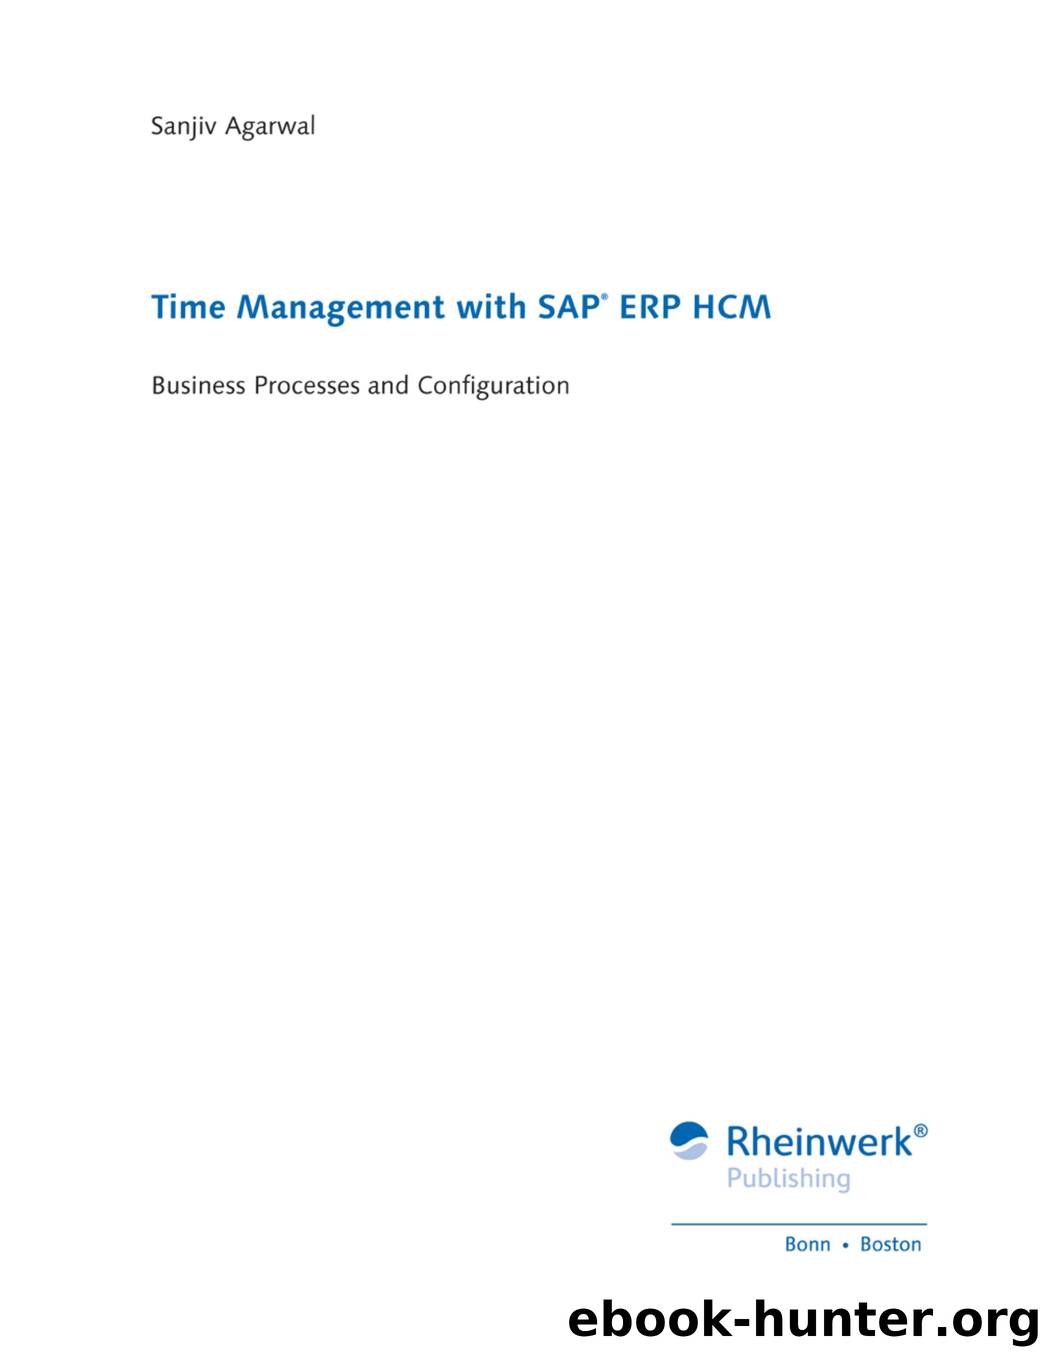 Time Management with SAP ERP HCM by Unknown